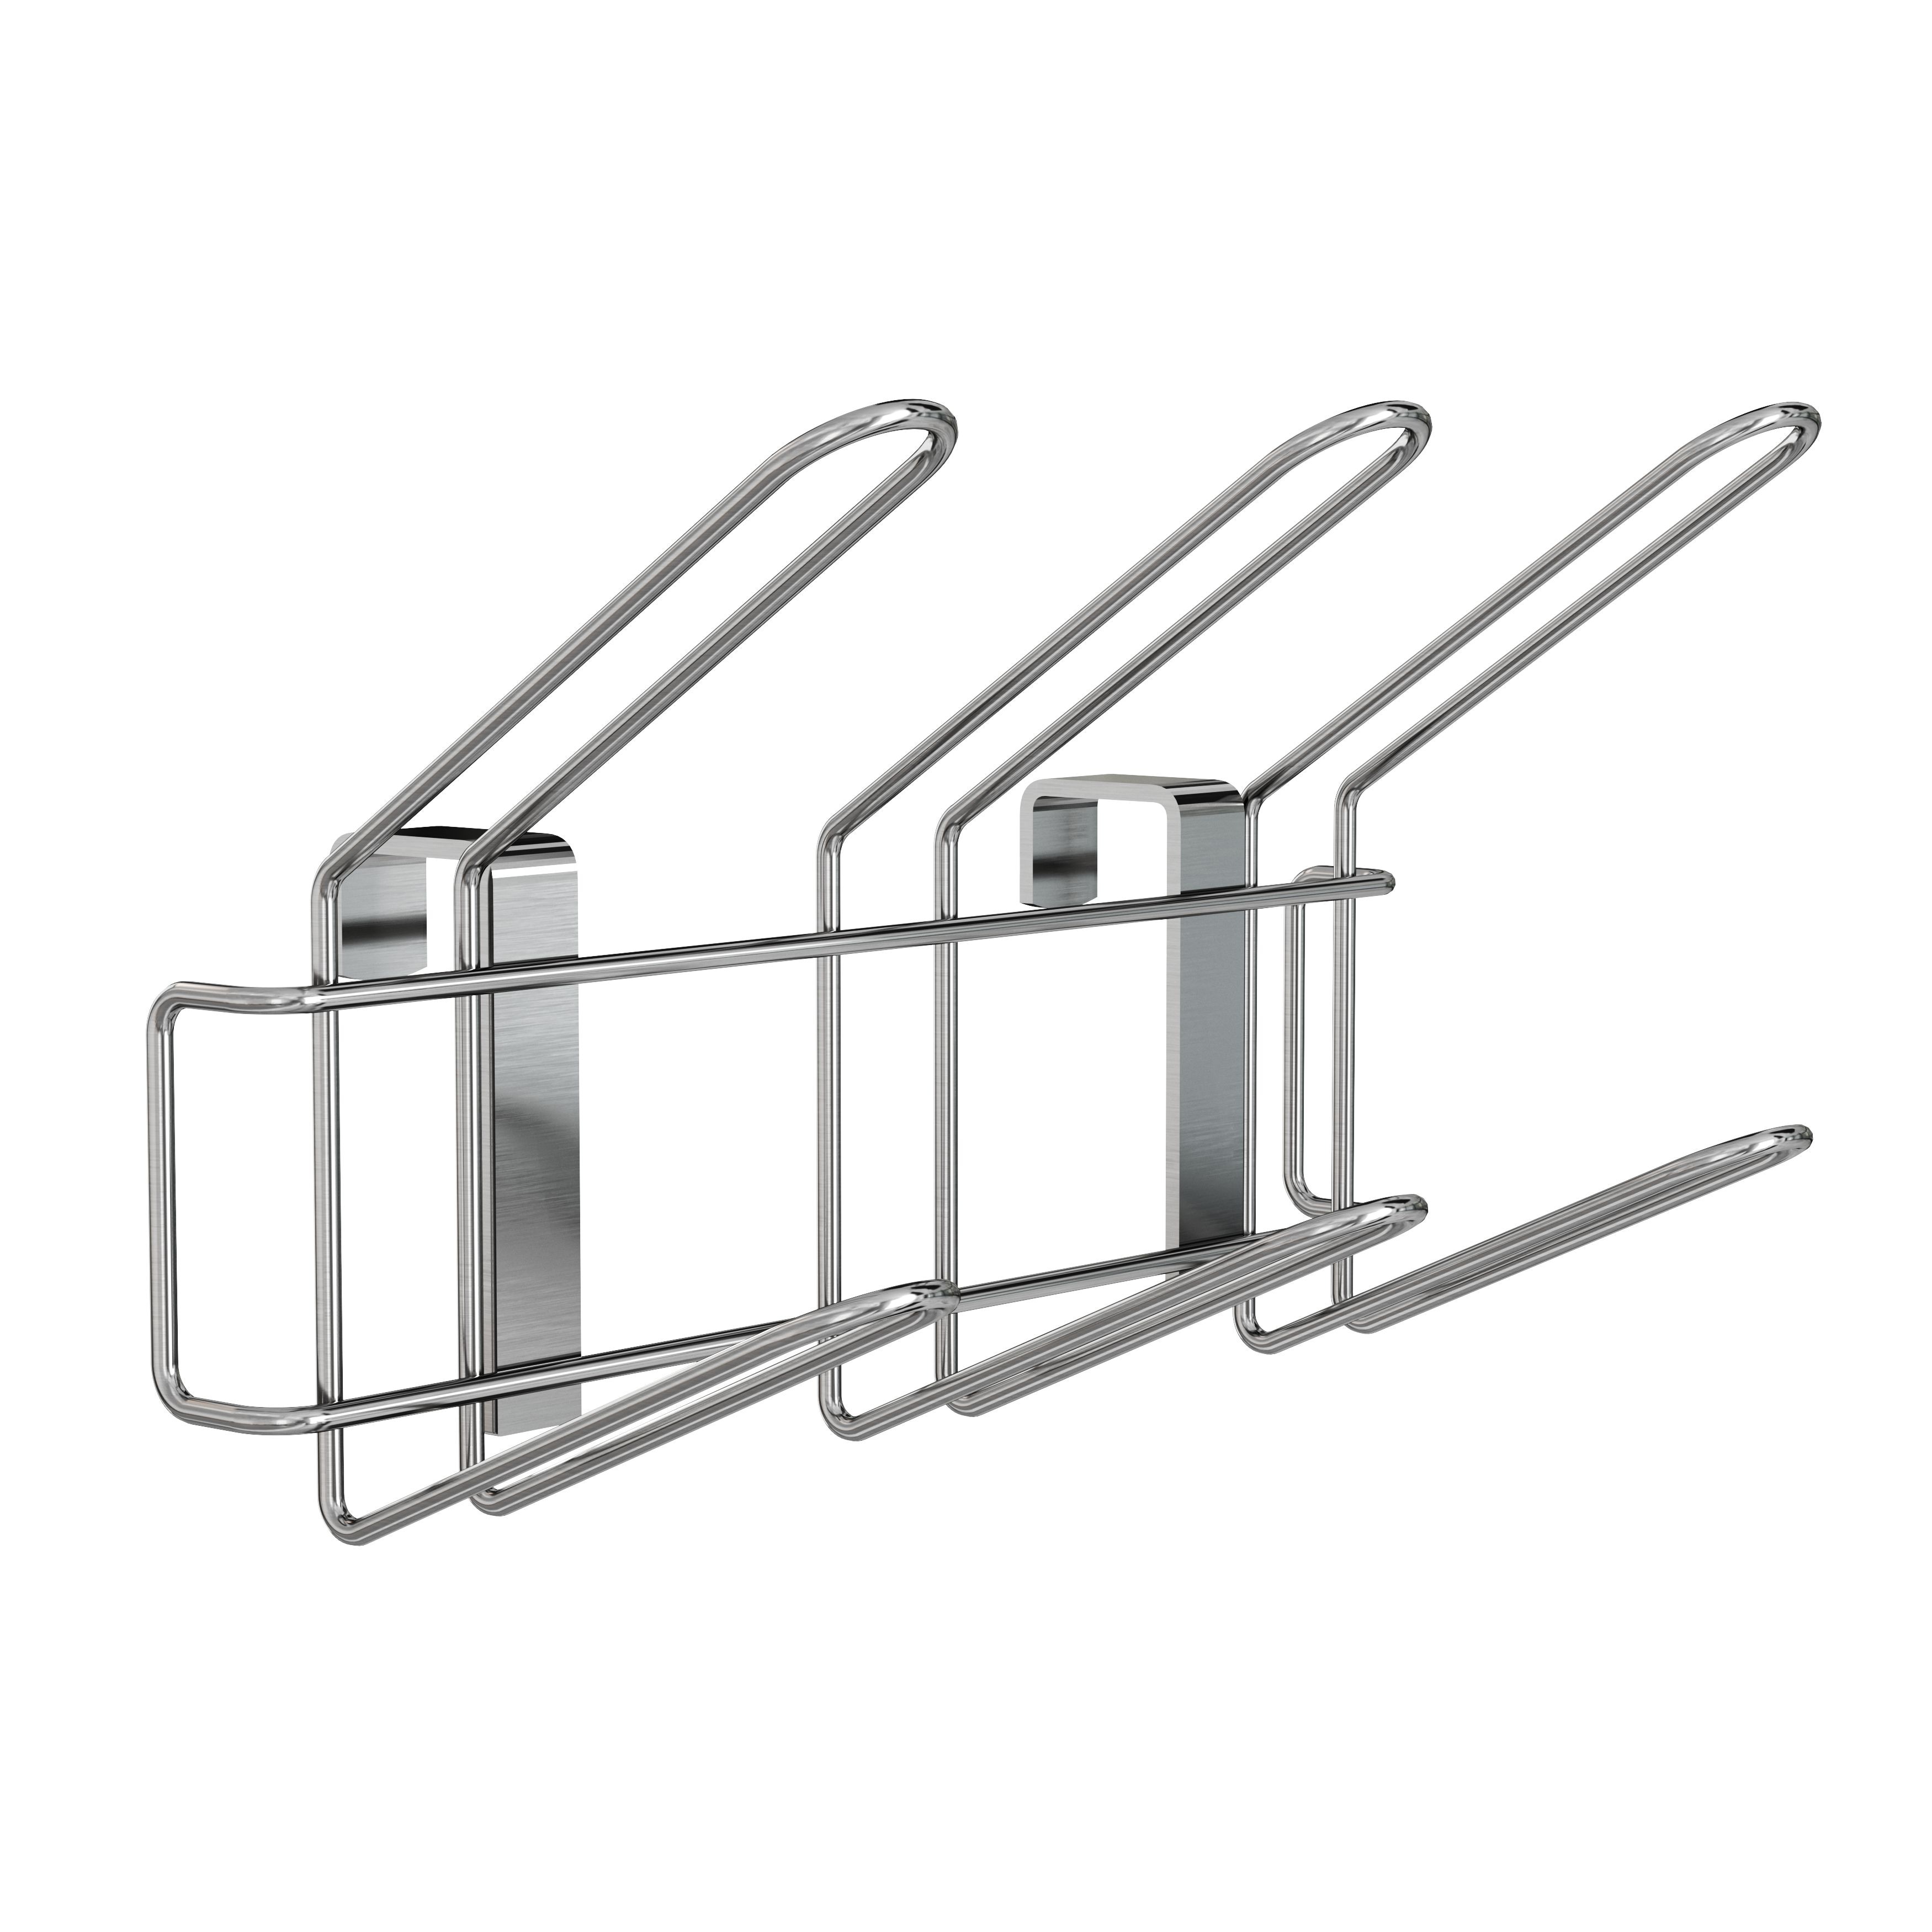 https://ak1.ostkcdn.com/images/products/is/images/direct/10d23bb0961706be96f16a0a3ad59f13062eb227/2-Tier-Kitchen-Stainless-Steel-Dish-Rack-with-Cutlery-Holder.jpg